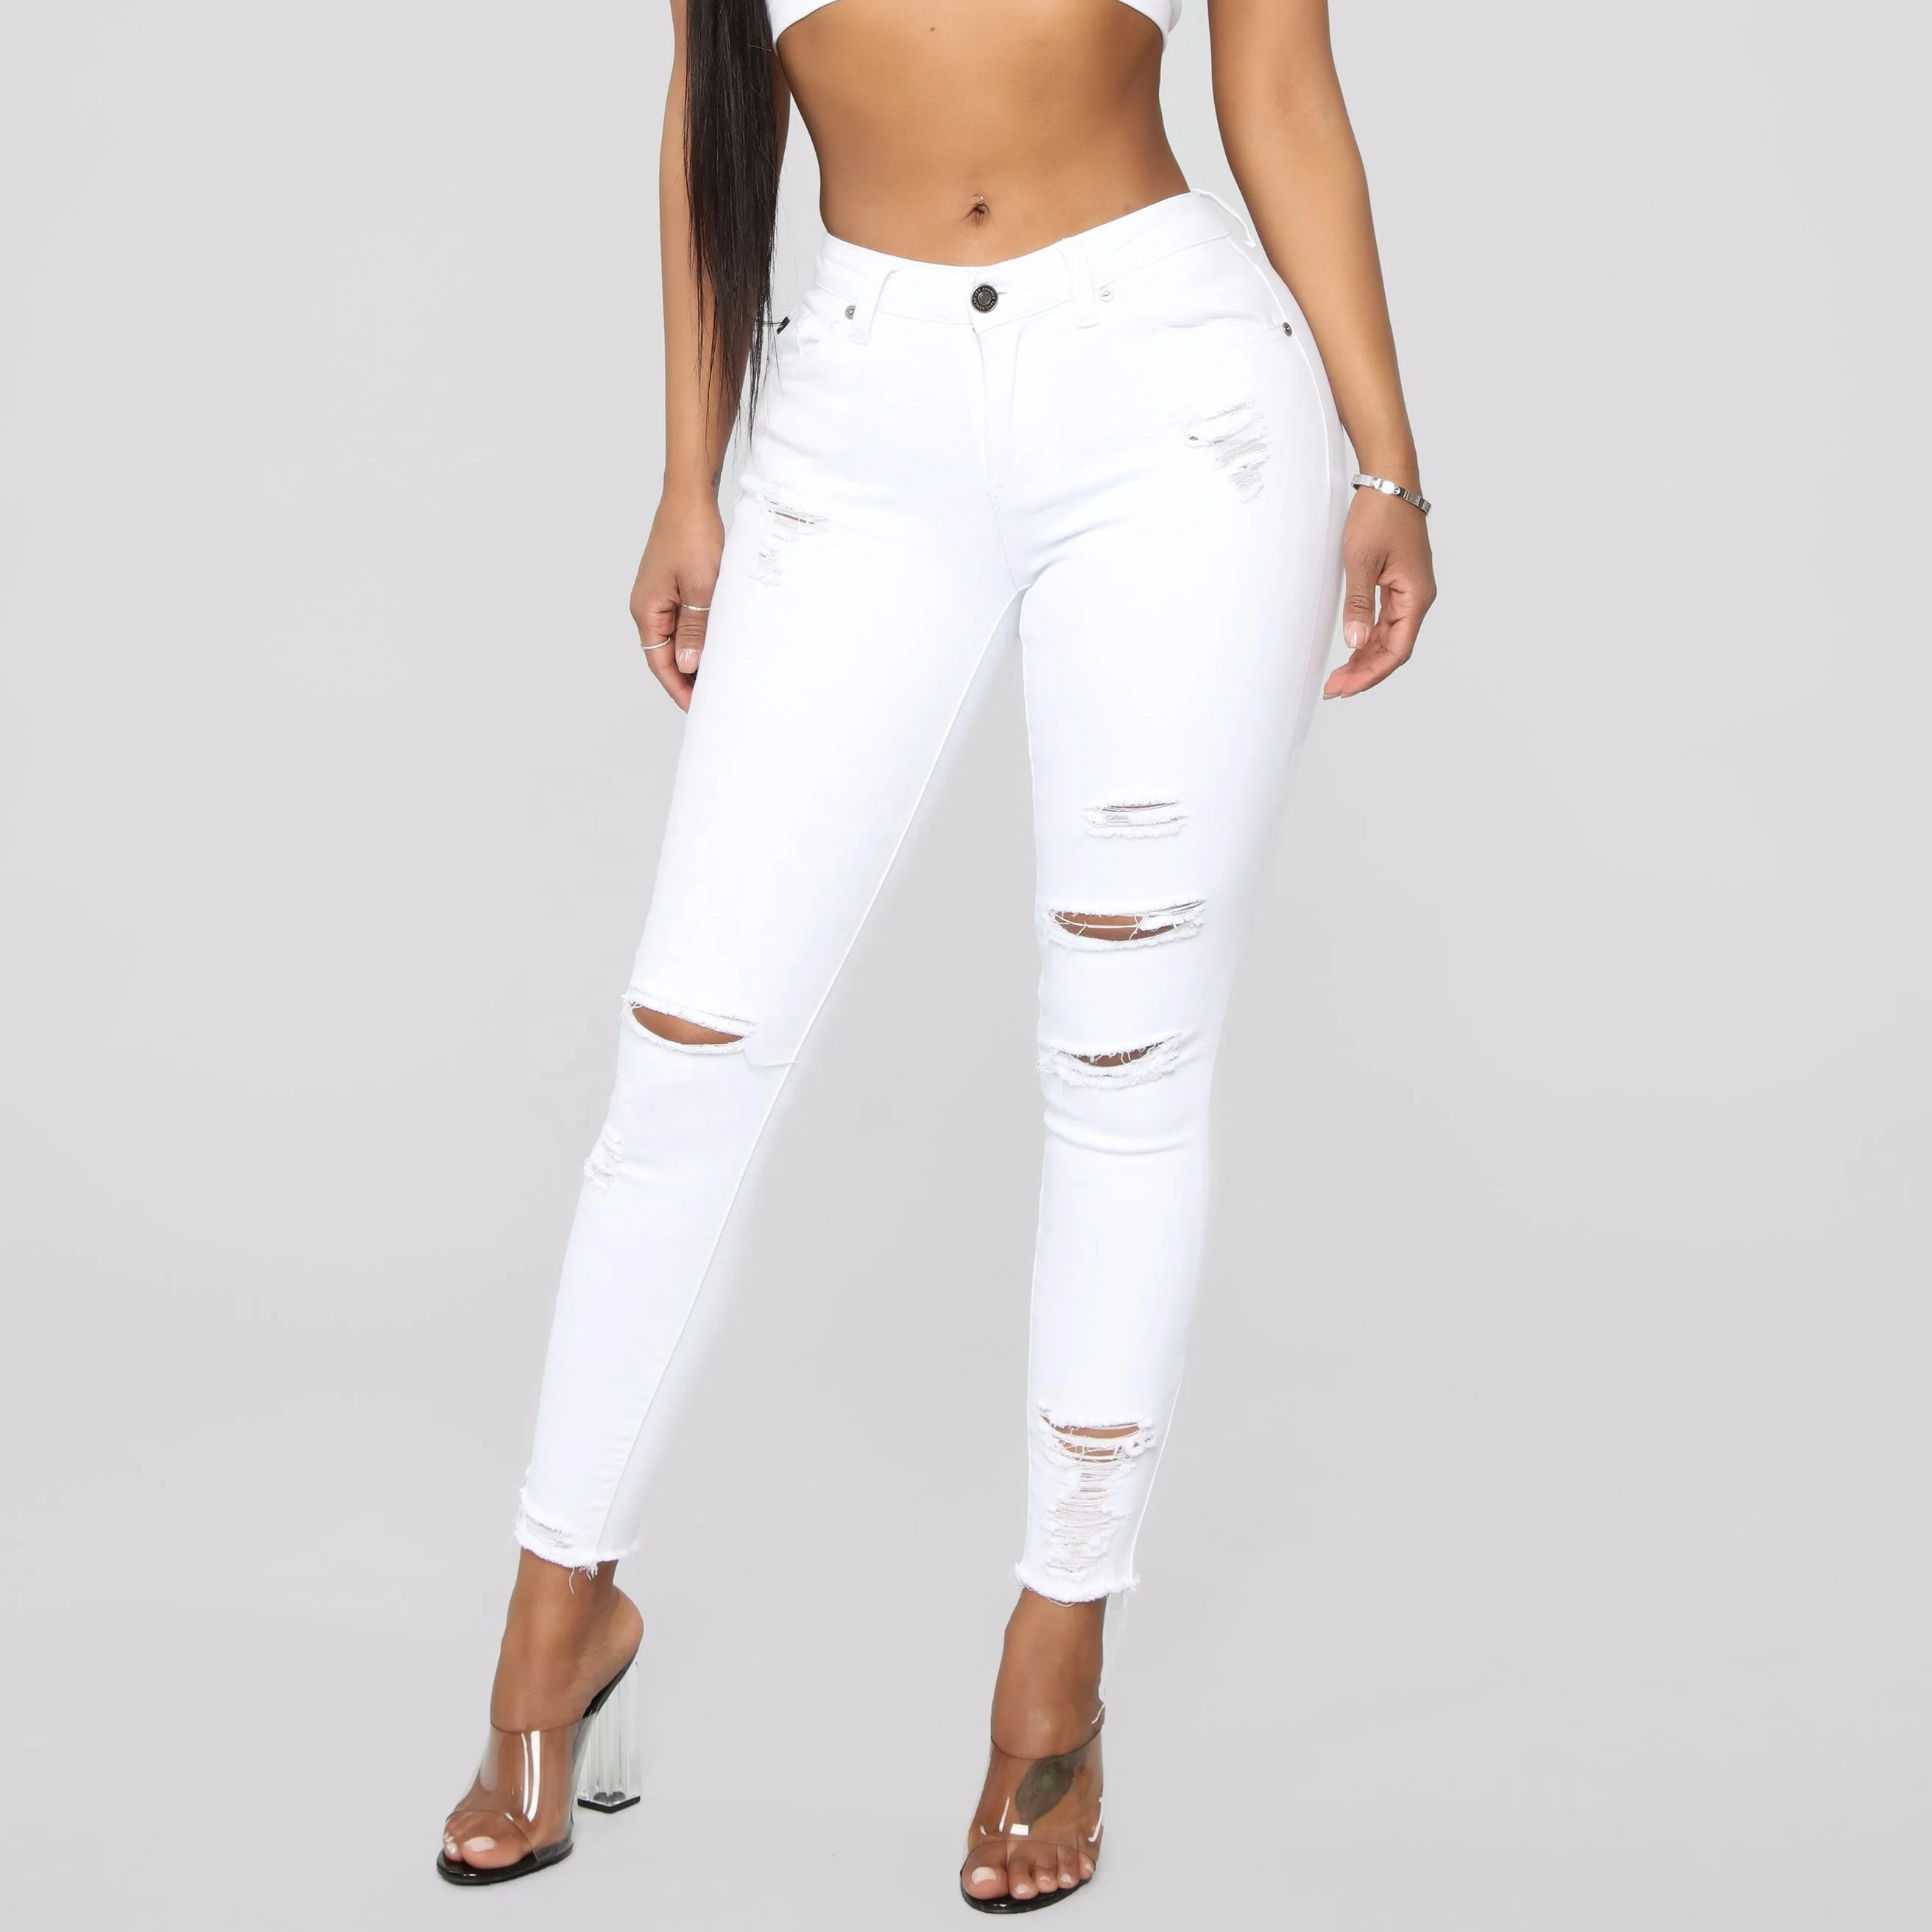 Stå sammen kort bh Source Good quality girl high waist jeans white ripped tights on  m.alibaba.com